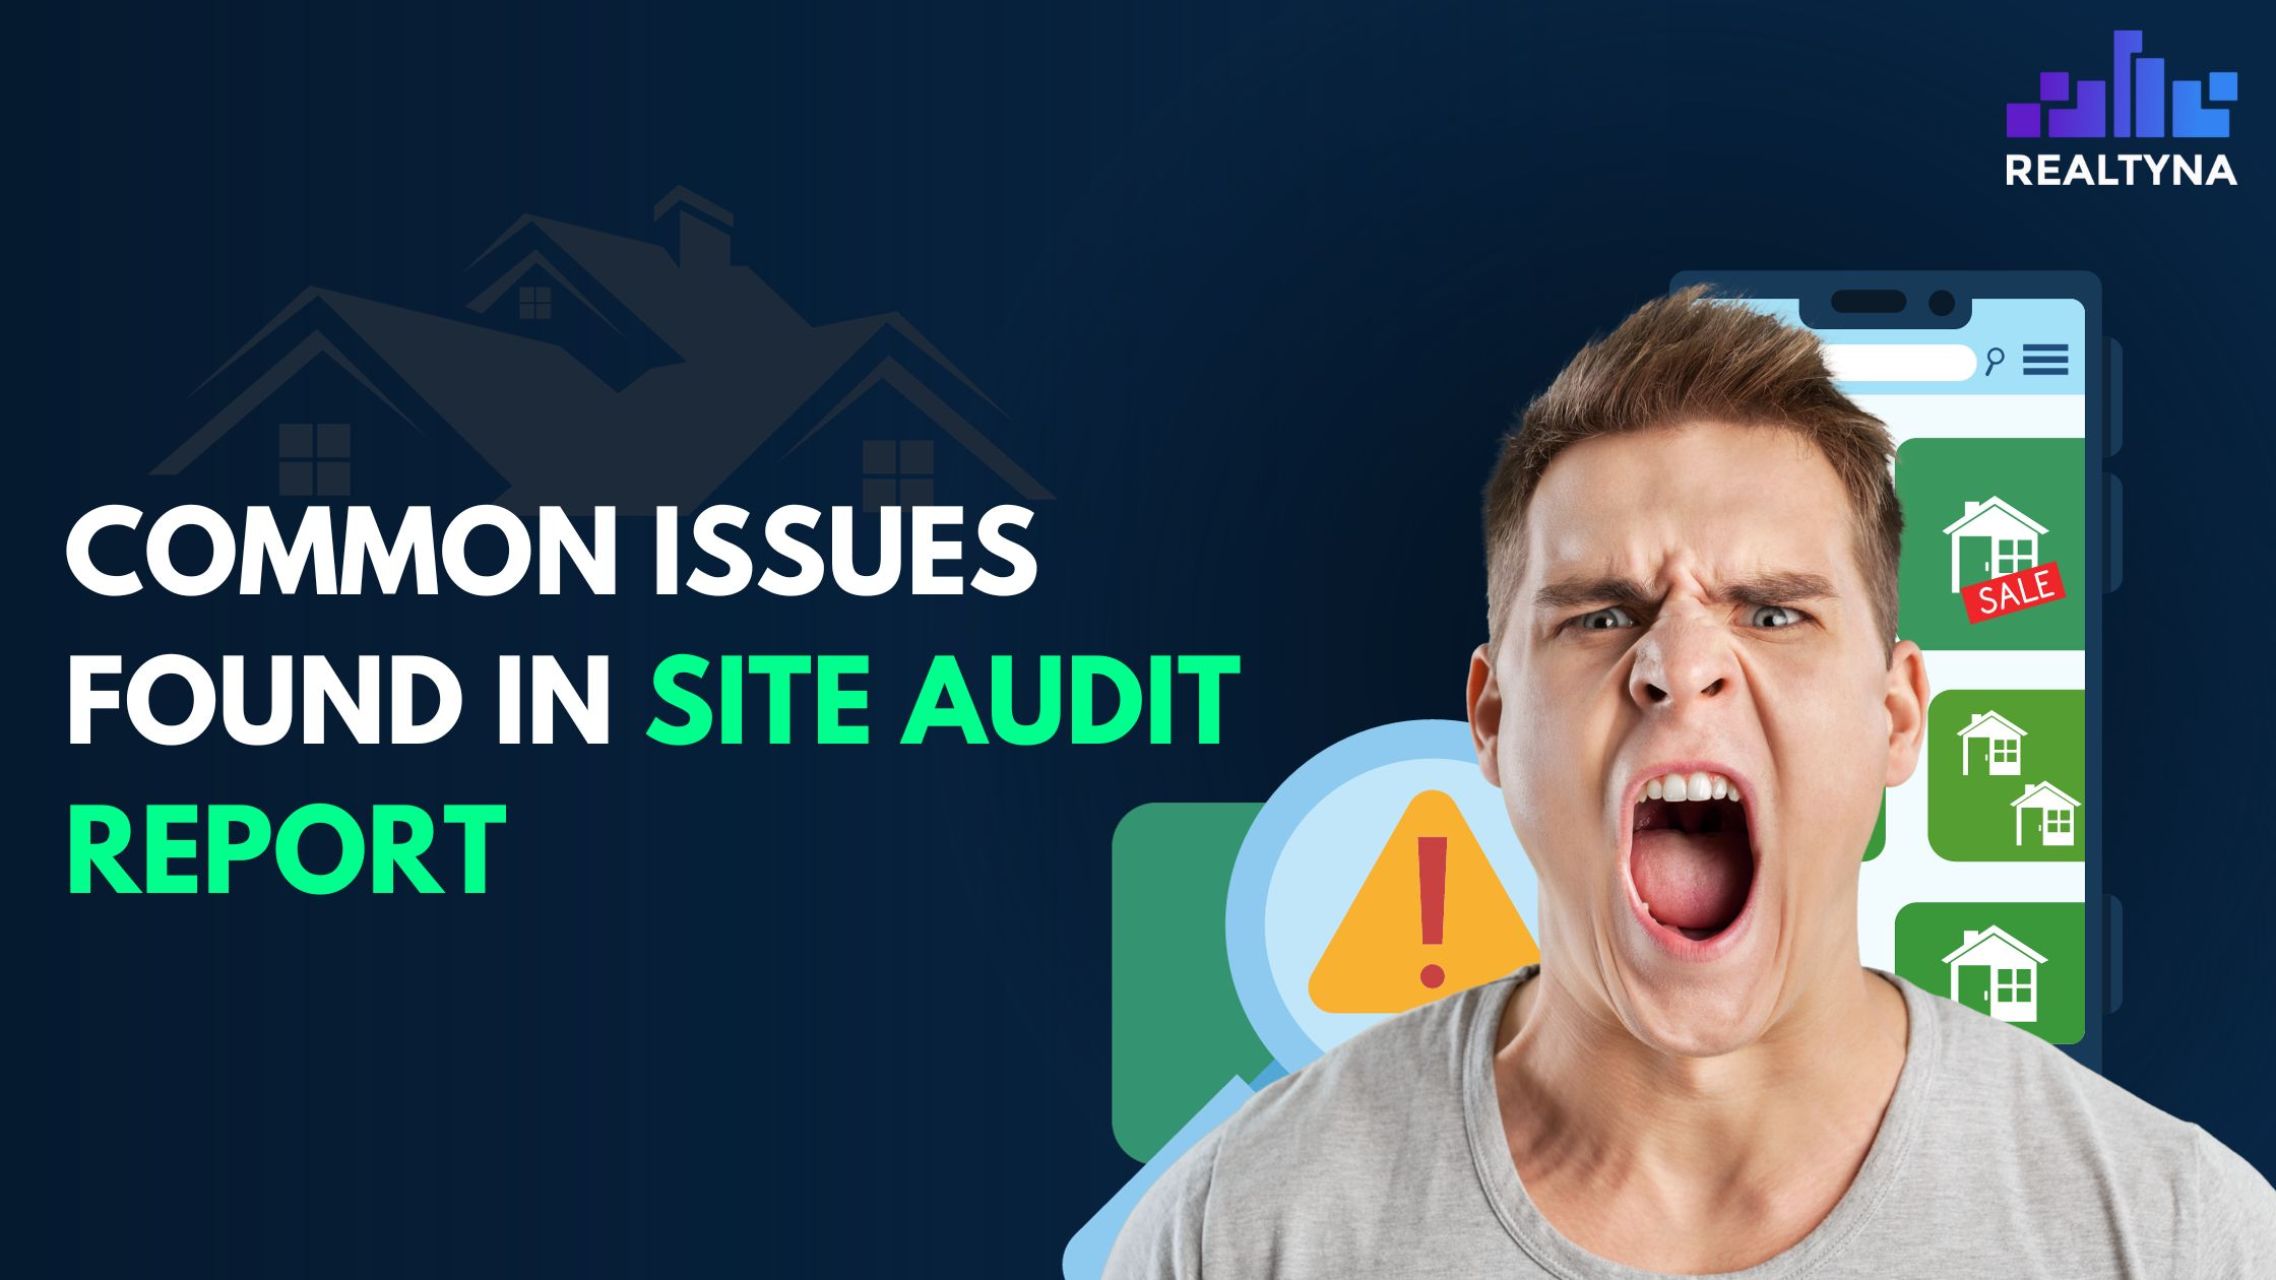 Common Issues Found in Site Audit Reports for Real Estate Websites